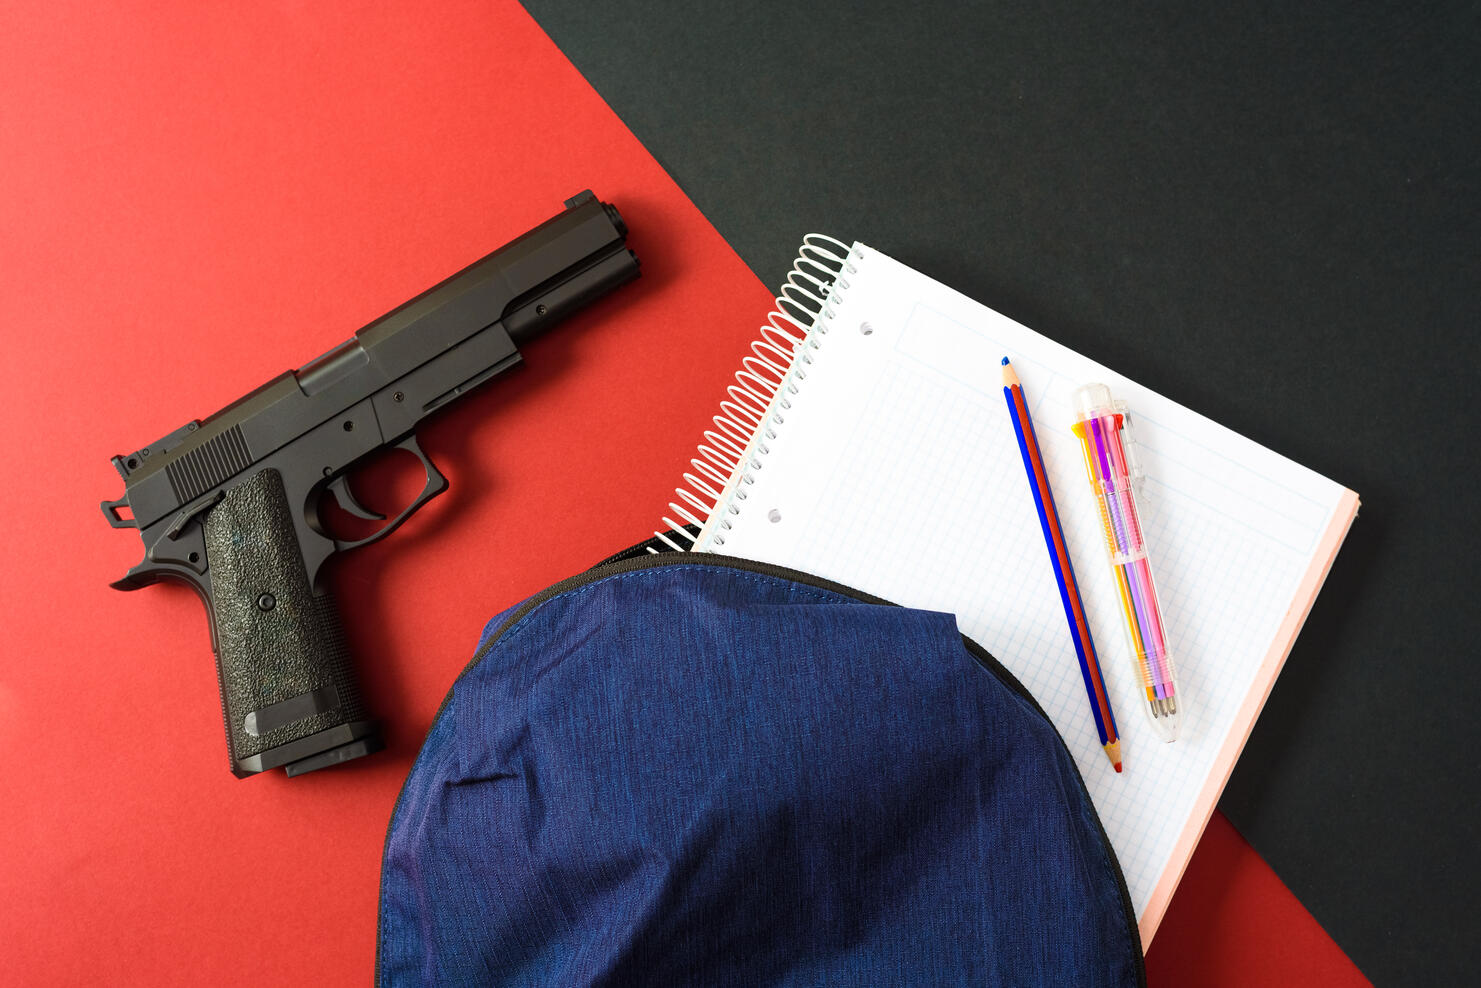 A firearm on the backpack of a young man at school, a loaded gun in a school.